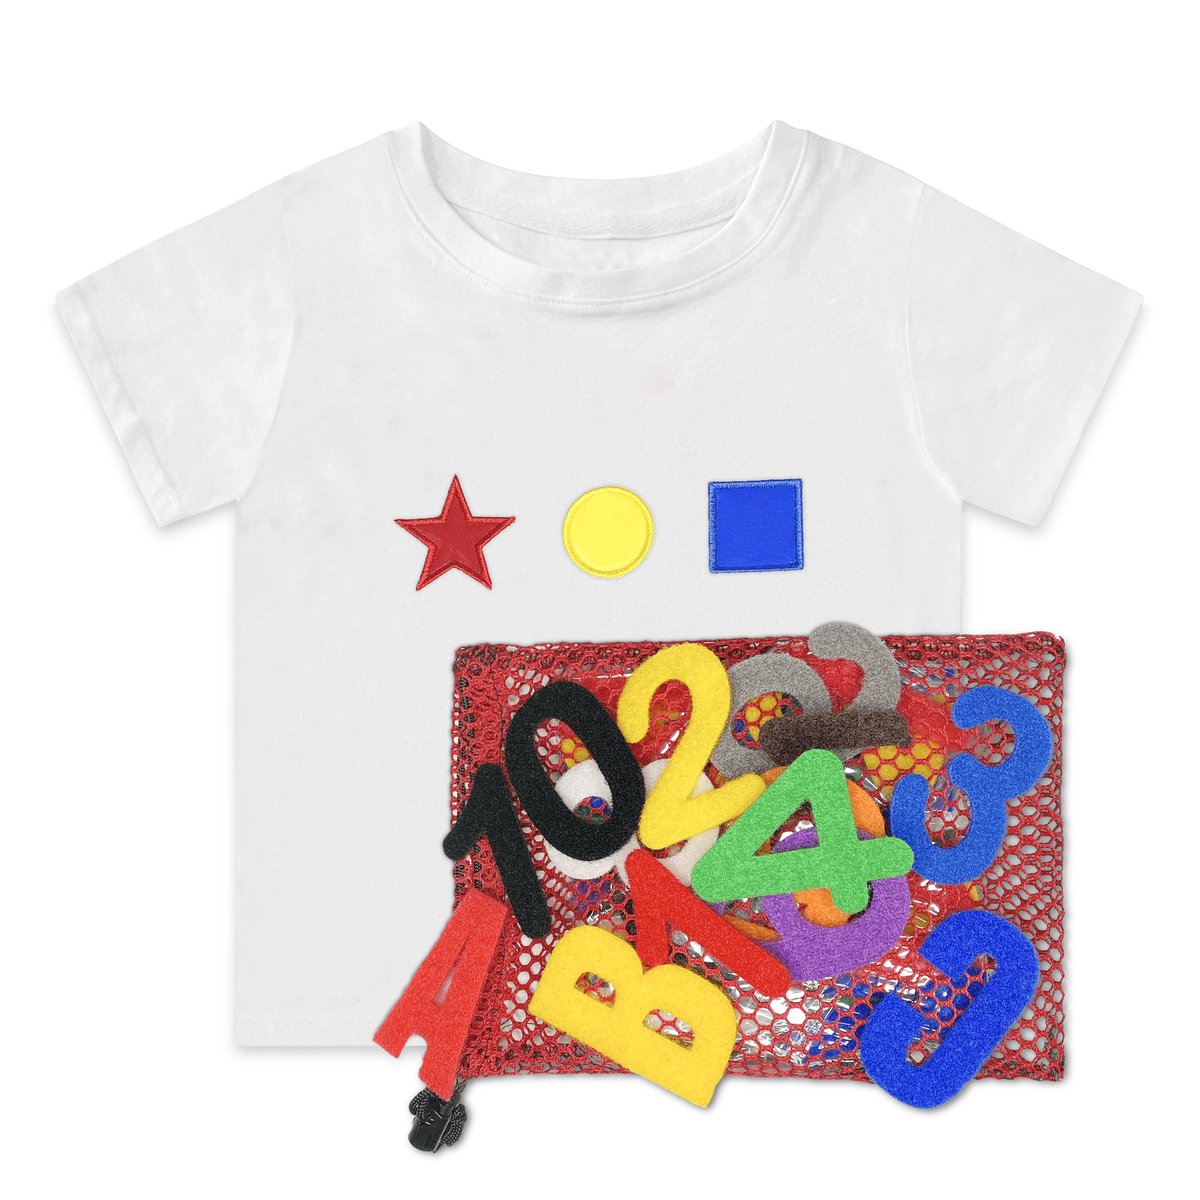 Follow me back at @TeachableC is an early educational tool in the form of apparel. That teaches Preschoolers ABC, 1.2.3. n Colors. It’s was also inspired by the J5 ABC song Whom I met Michael Jackson at 12yrs old n Chi on tour and the rest was God. MJ Billboard ad to honor Q